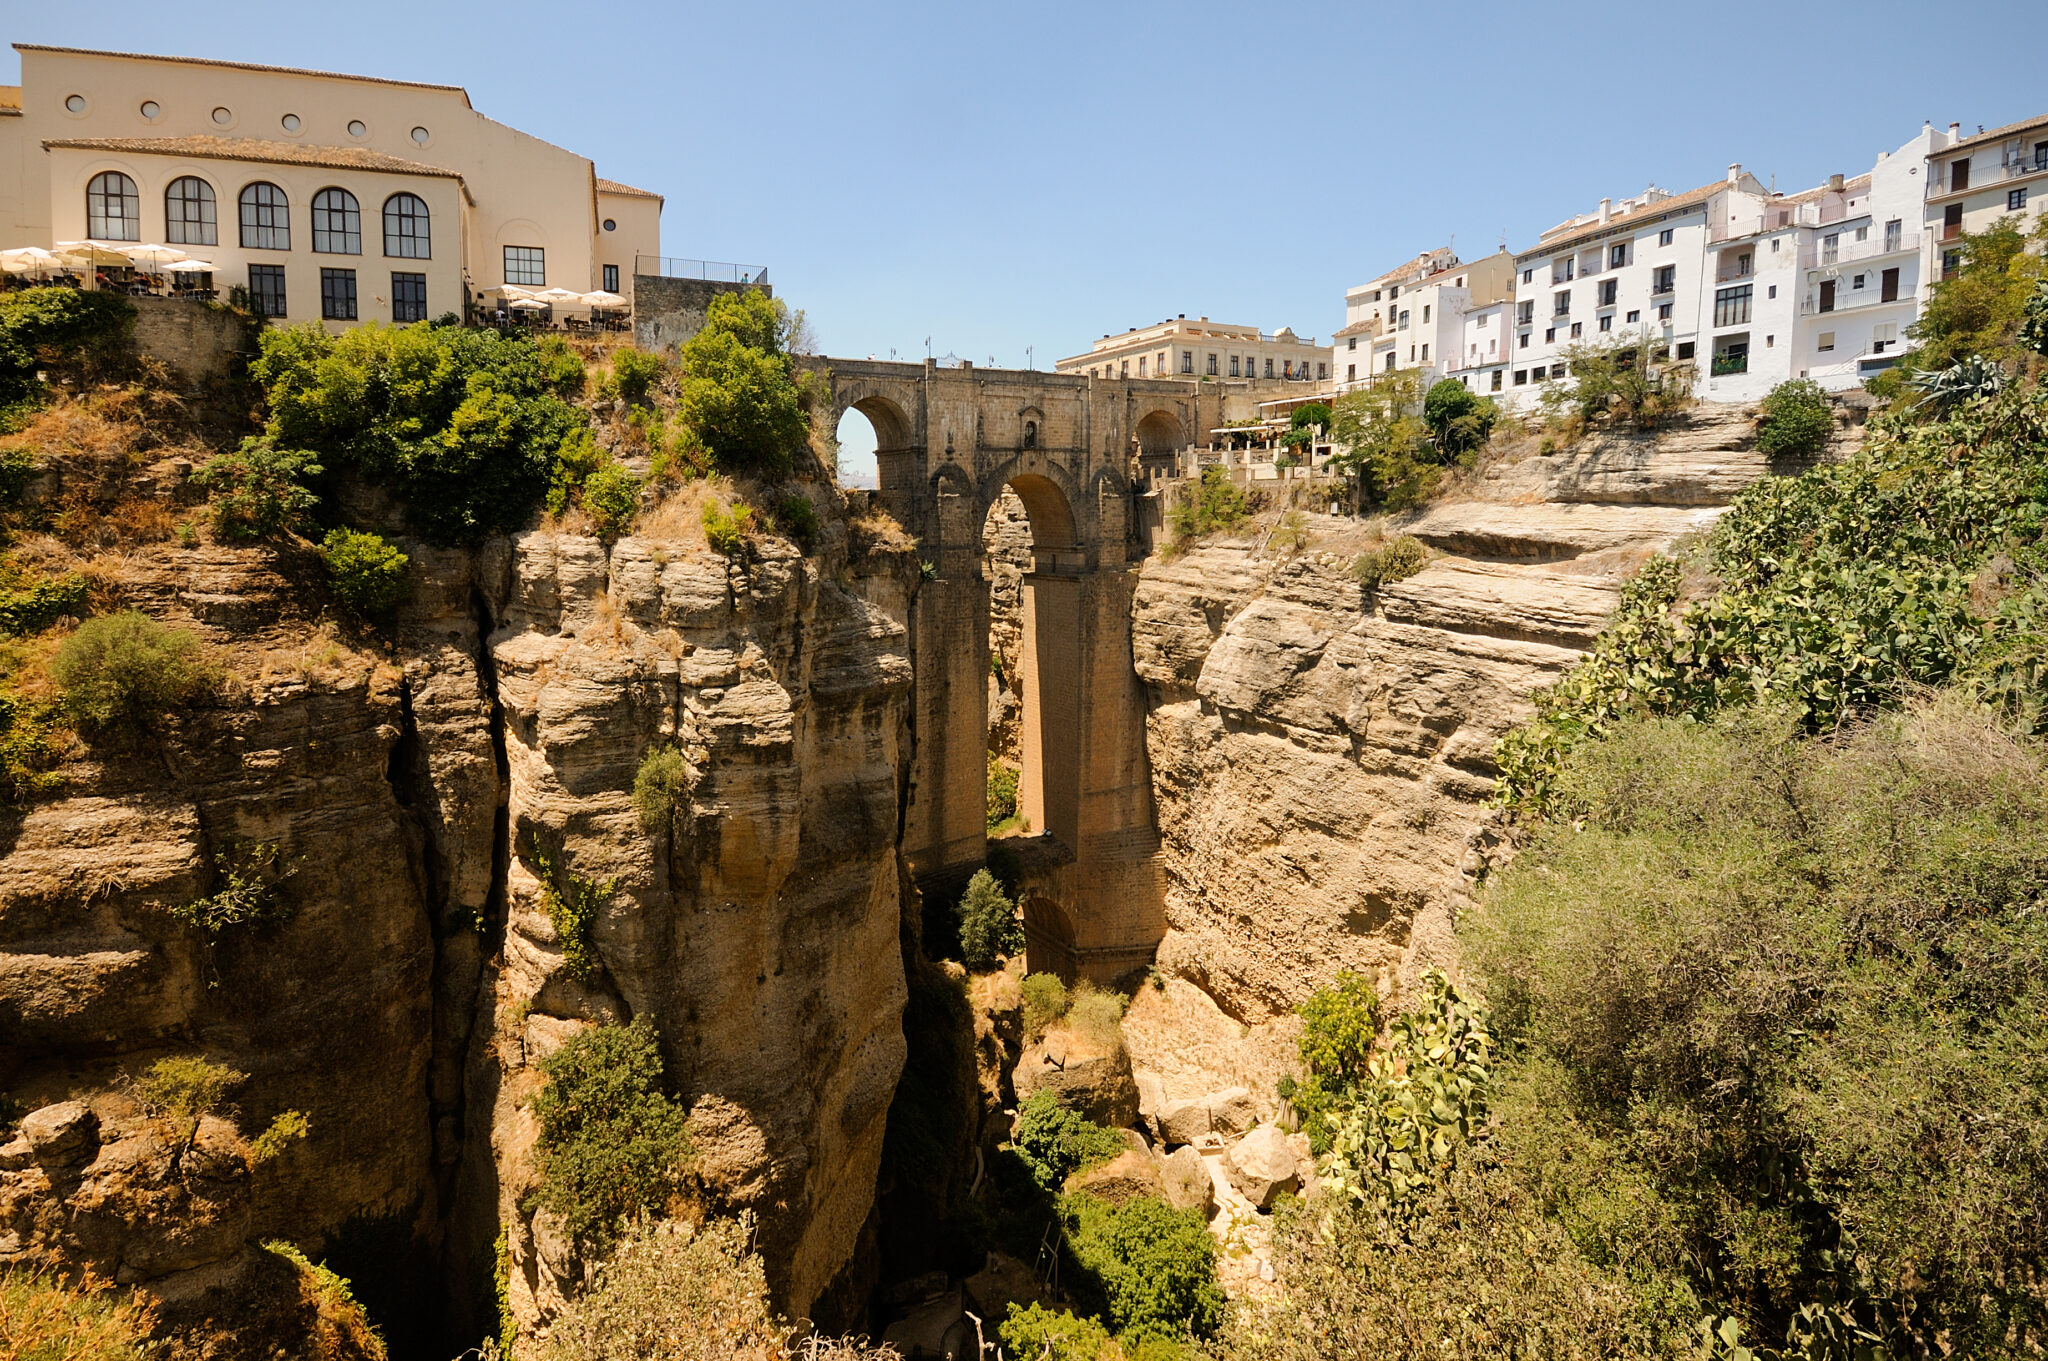 New bridge in Ronda, one of the famous white villages in Málaga, Andalusia, Spain